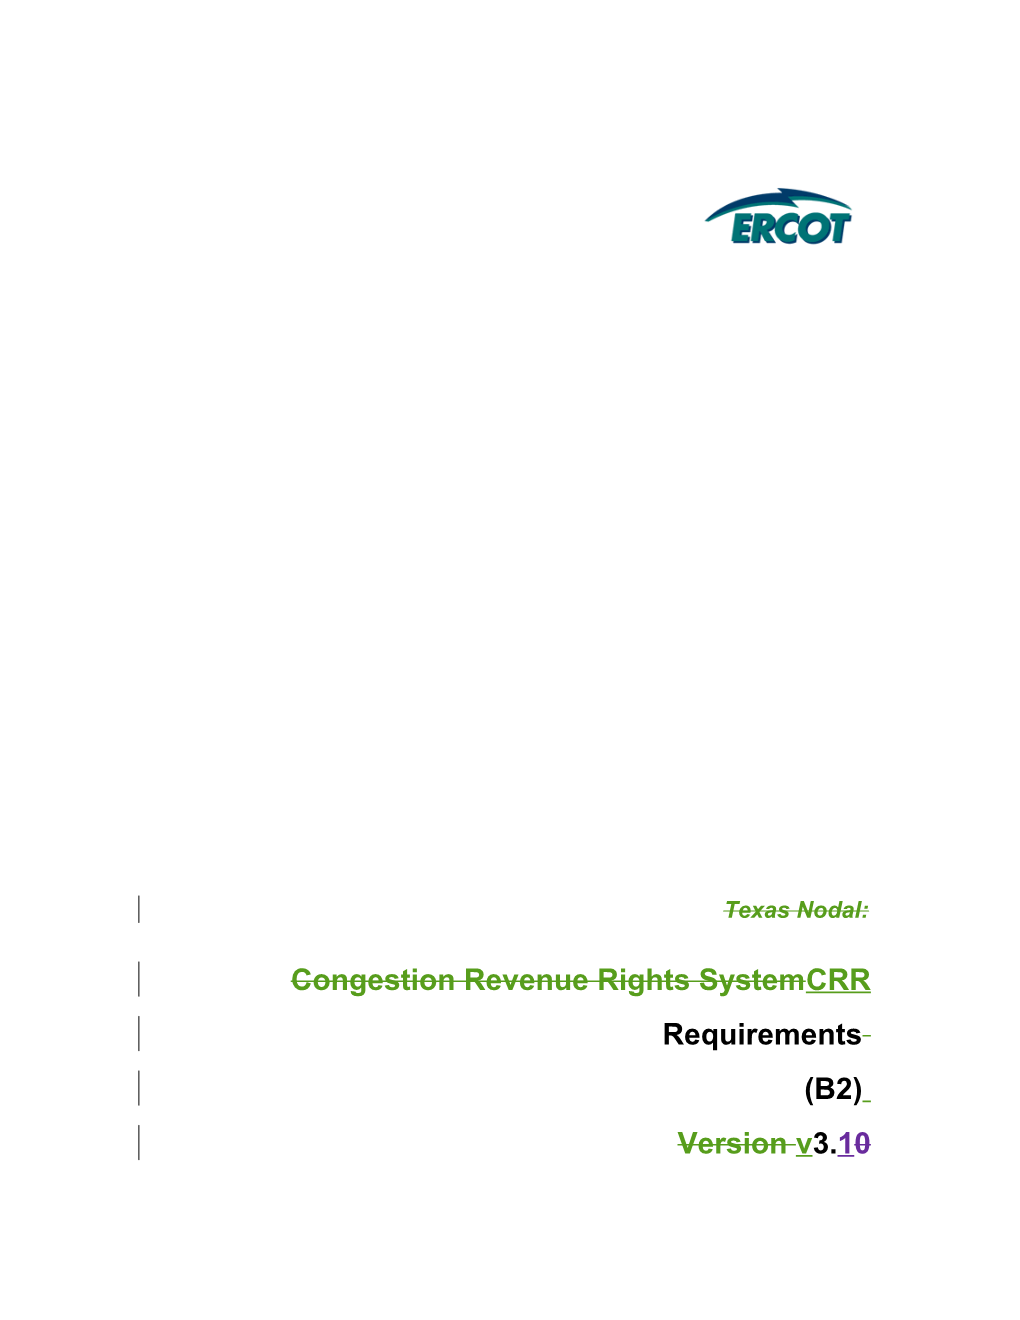 Congestion Revenue Rights System CRR